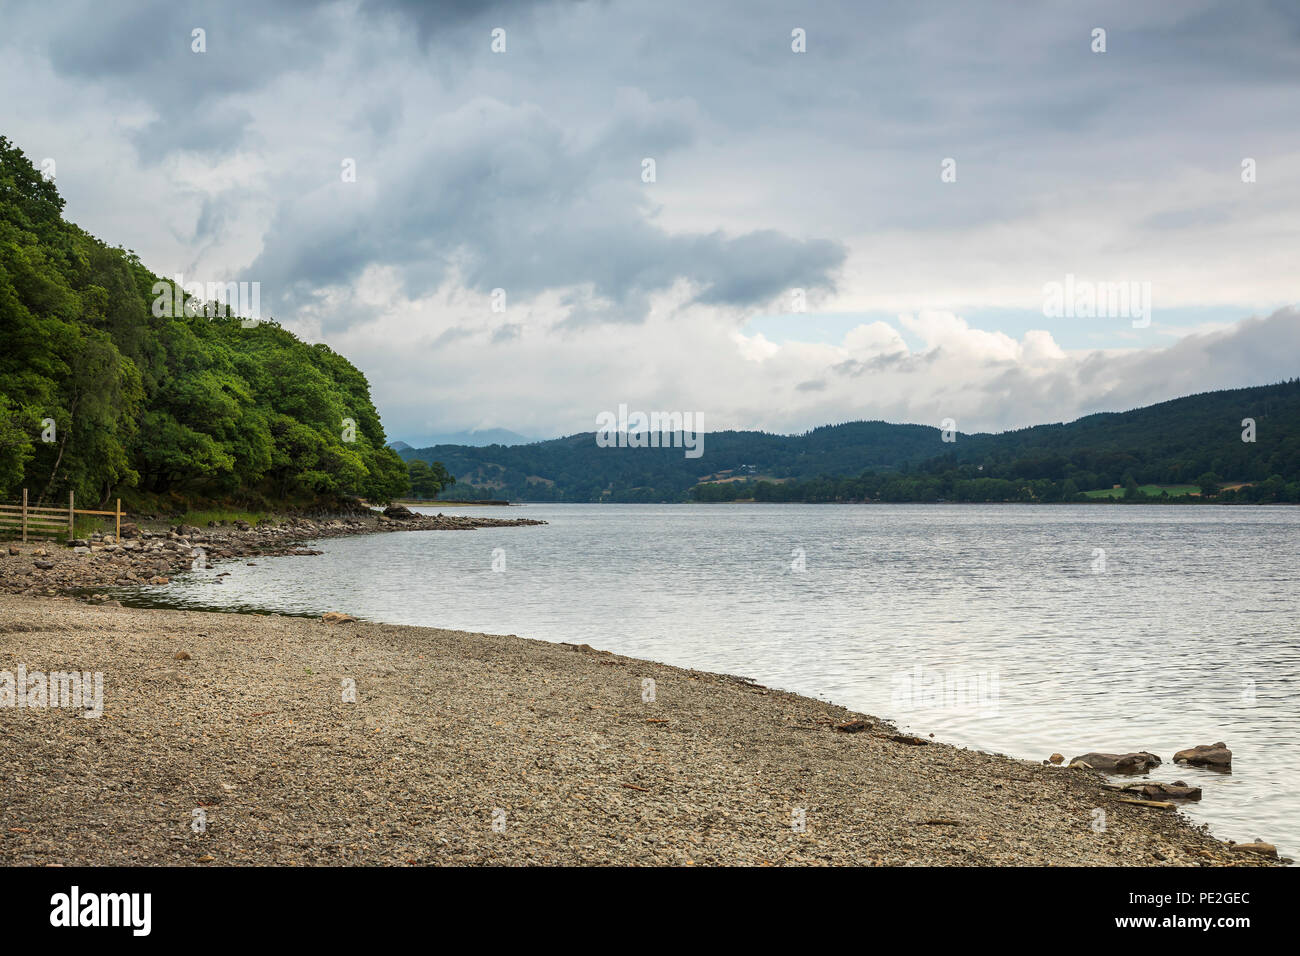 An image of the shoreline and dramatic sky at Coniston Water, Lake District, Cumbria, England, UK. Stock Photo